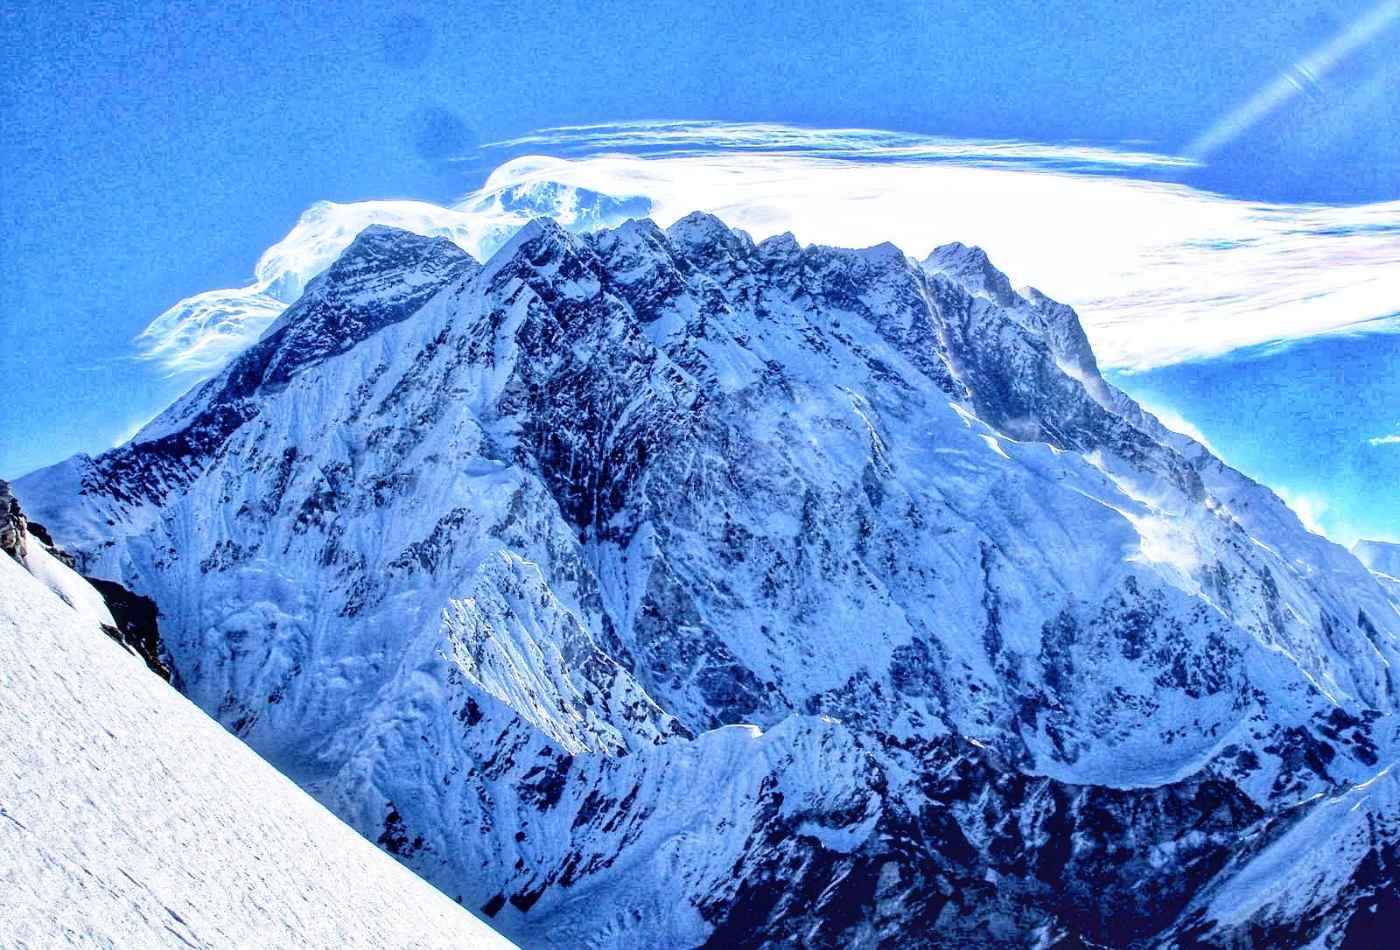 Above the surrounding landscape, there is a stunning view of Mt. Everest and Mt. Nuptse from the summit of Labuche Peak.